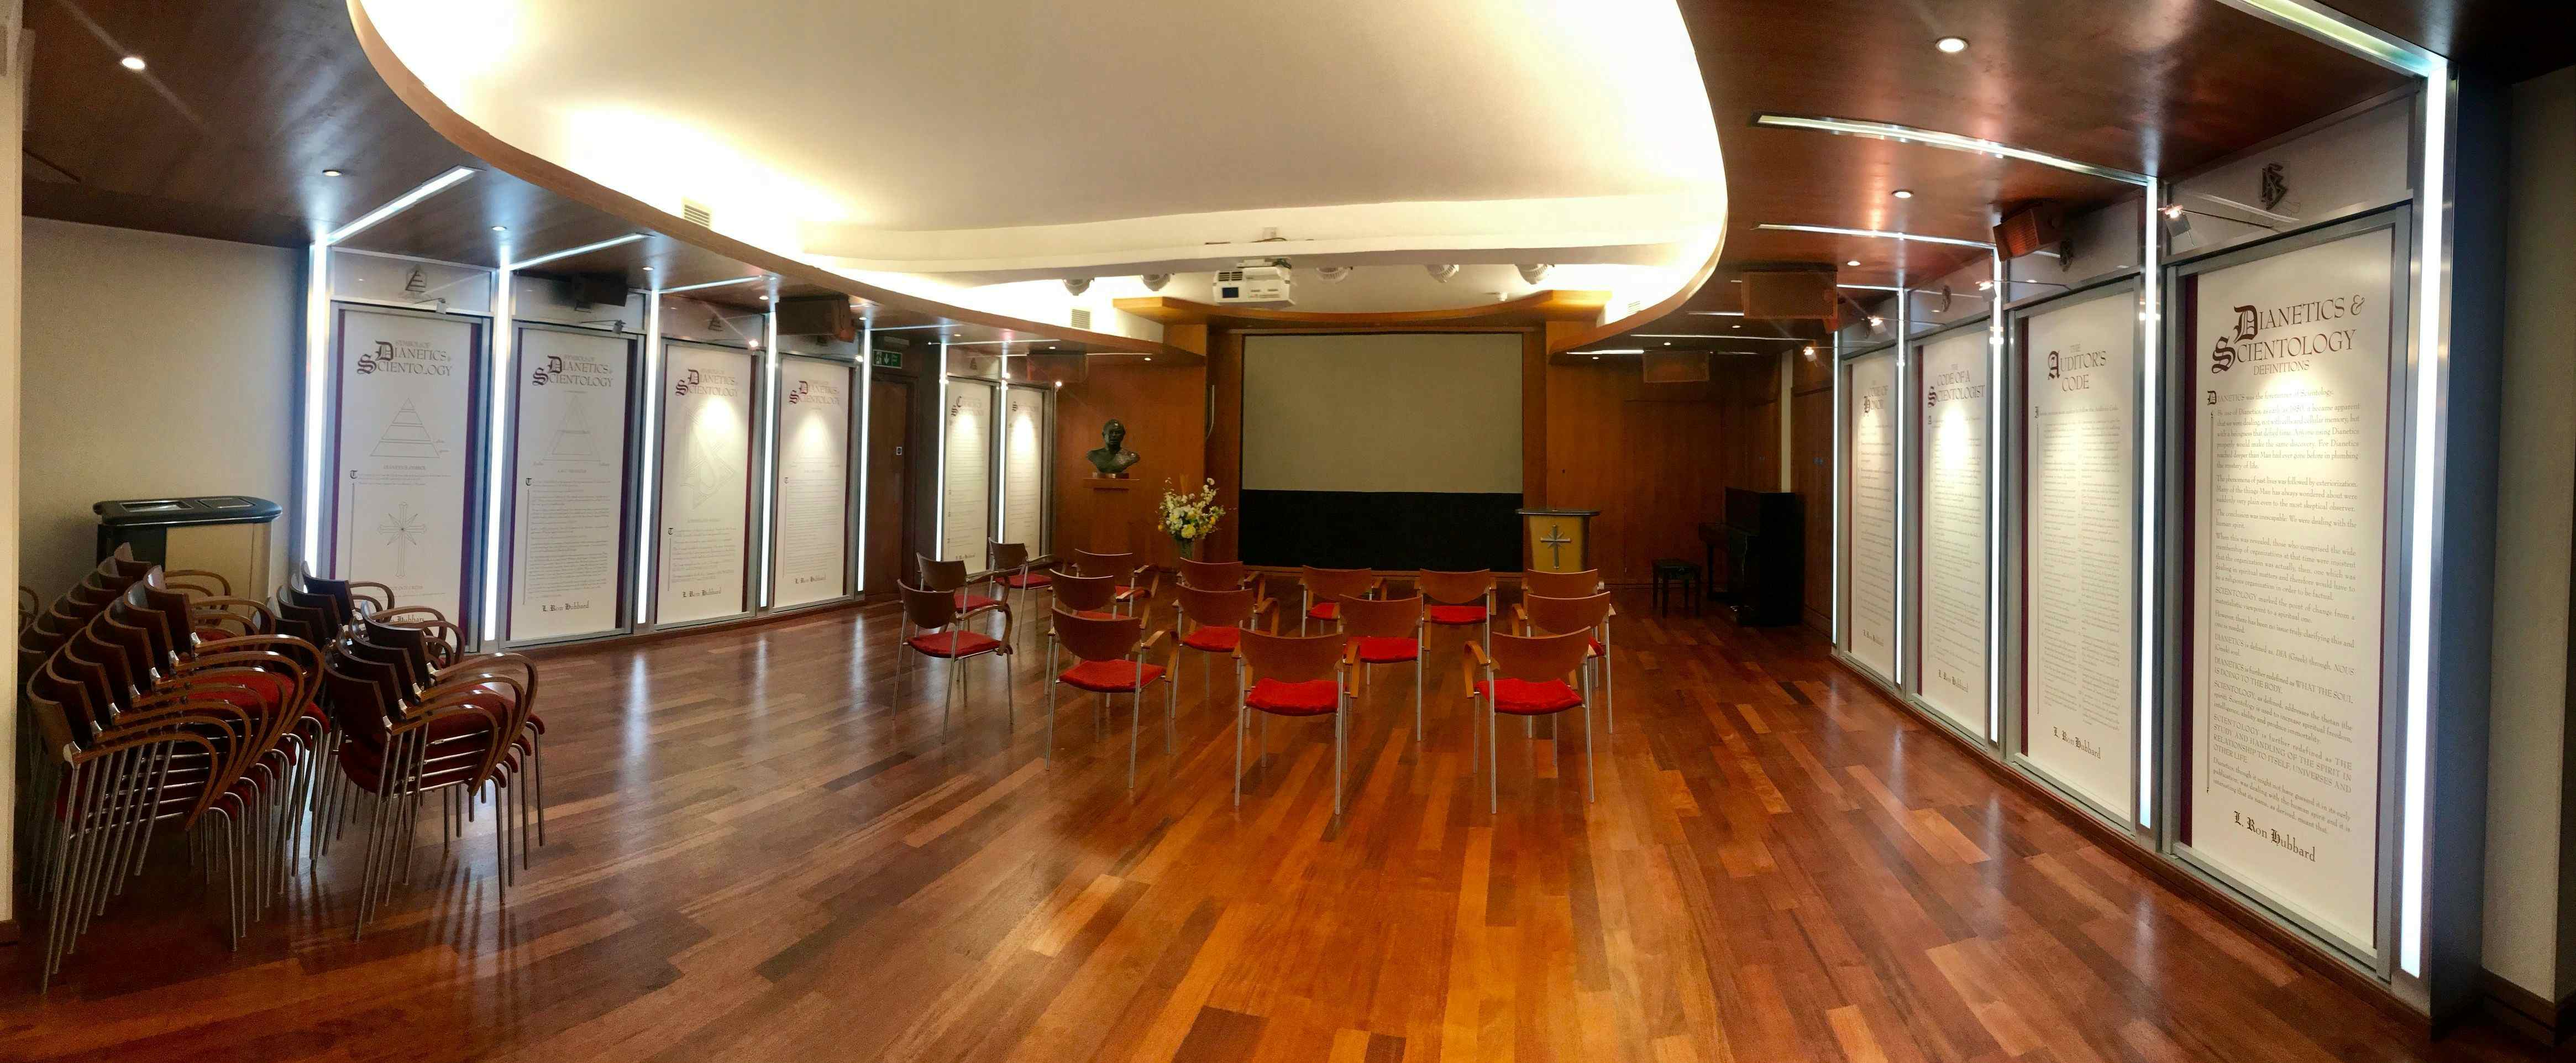 Events and Seminar Space, Chapel